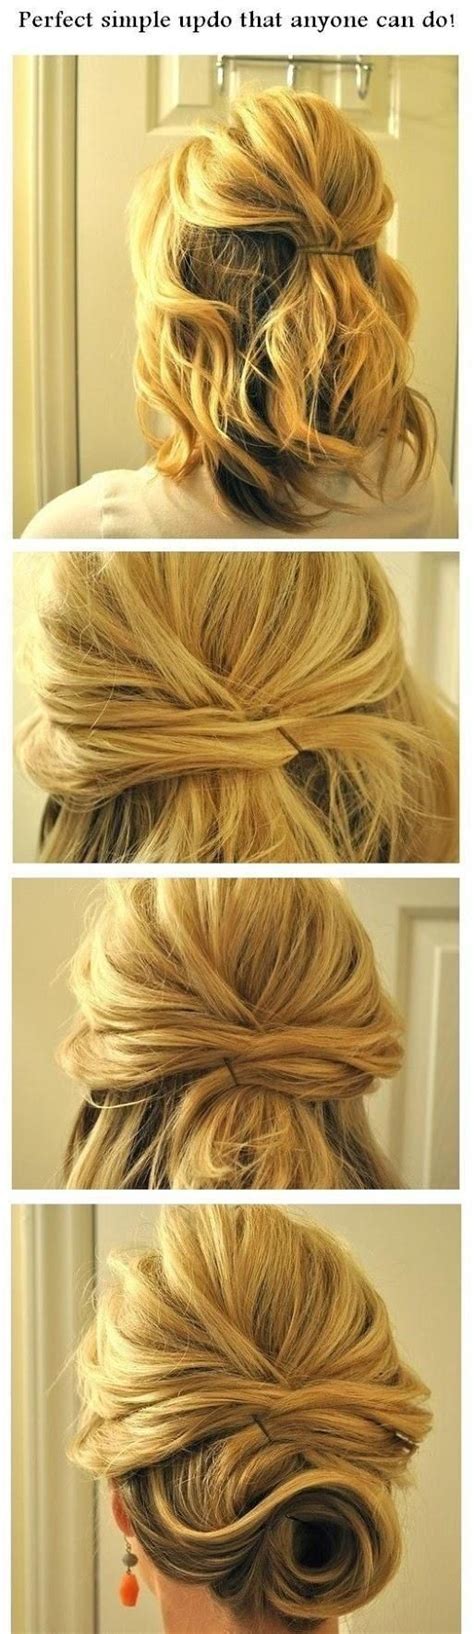 Ahead we rounded up a list of quick and easy hairstyles for medium length hair we know for sure you can manage on your own. 14 Easy Step by Step Updo Hairstyles Tutorials - Pretty ...